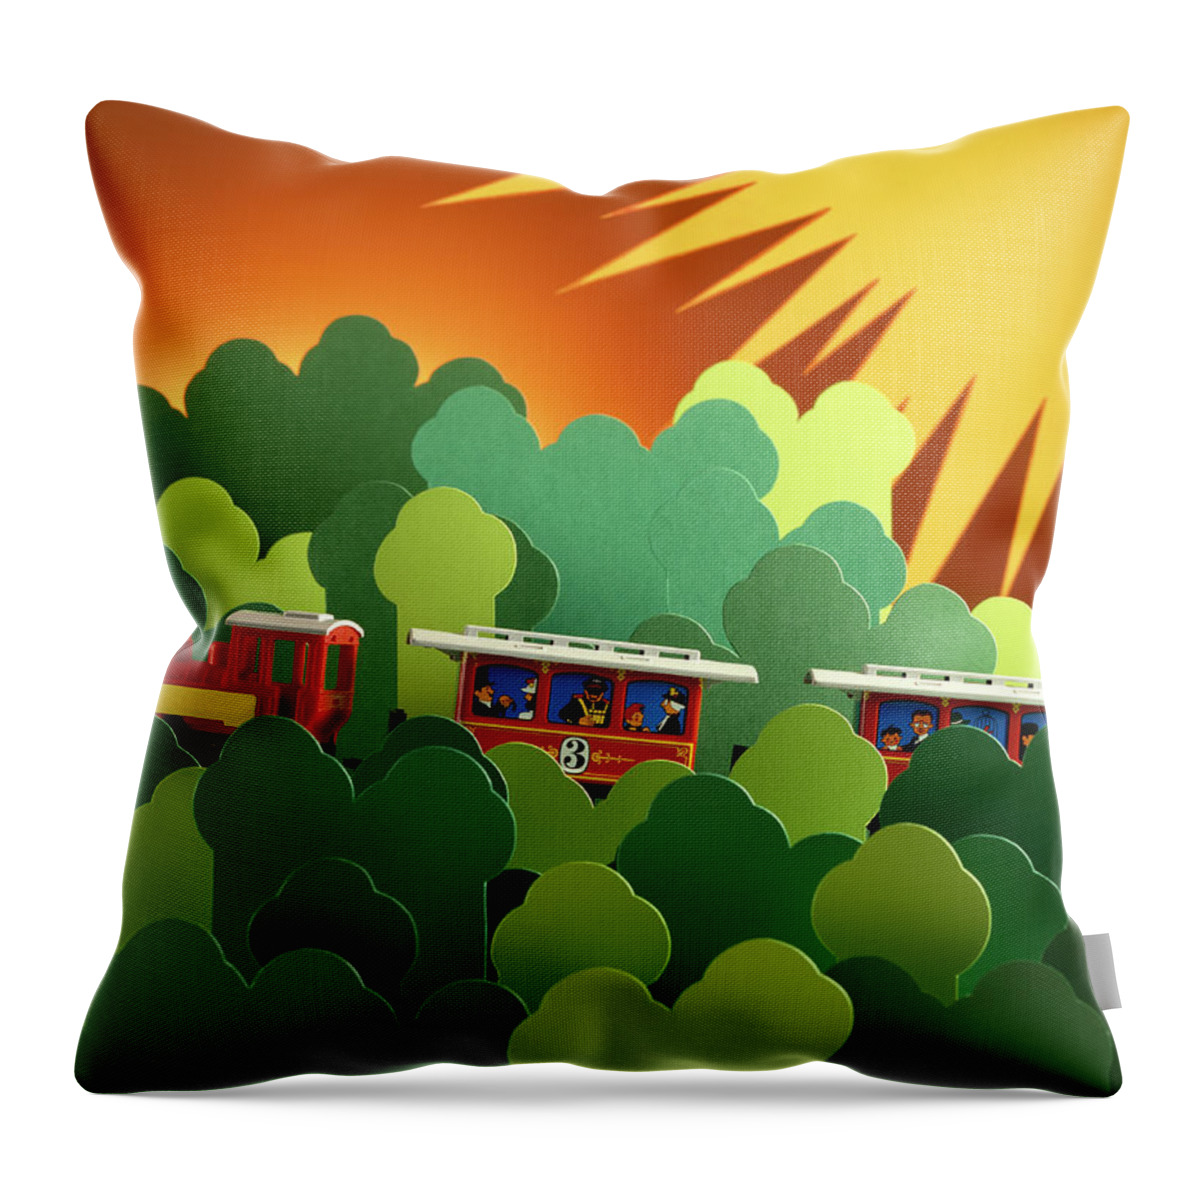 Train Throw Pillow featuring the photograph Toy Train by Stefania Levi